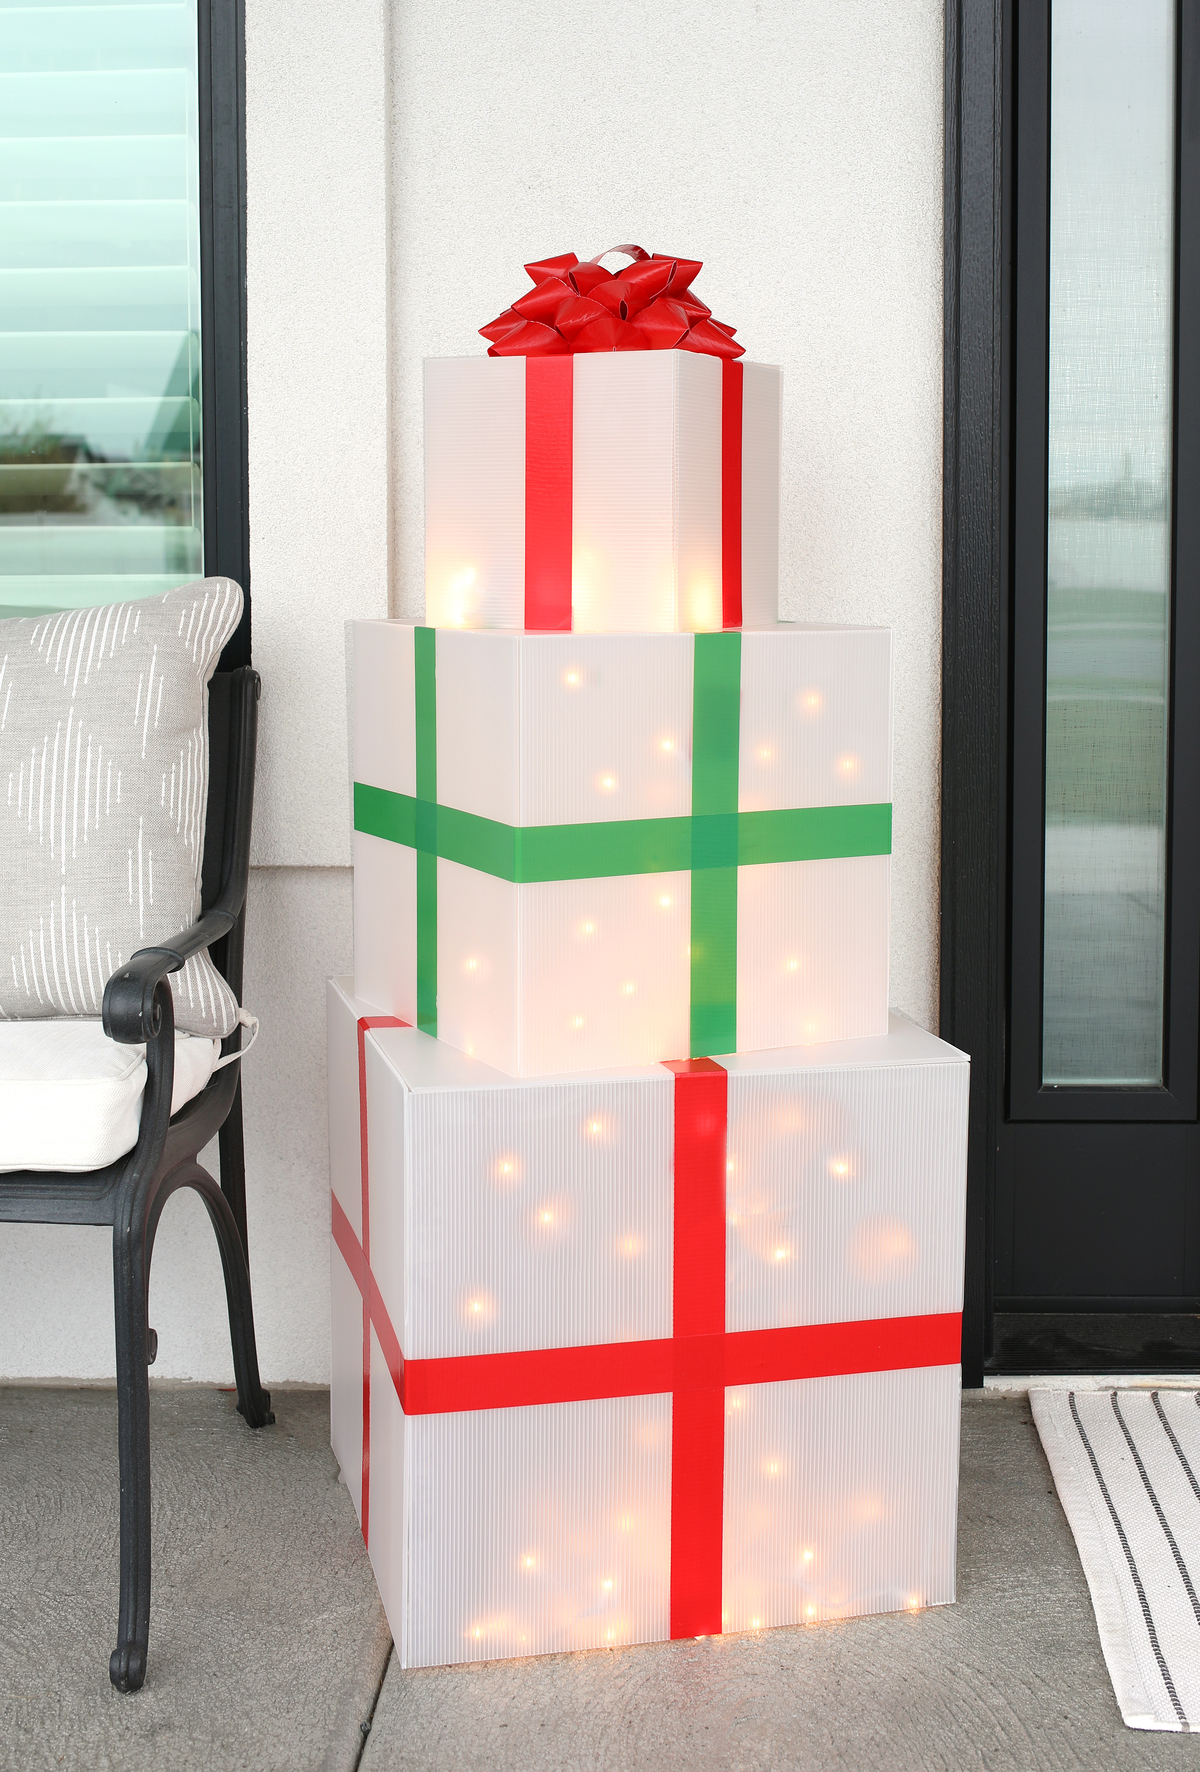 How-To: Giant Light Up Christmas Presents